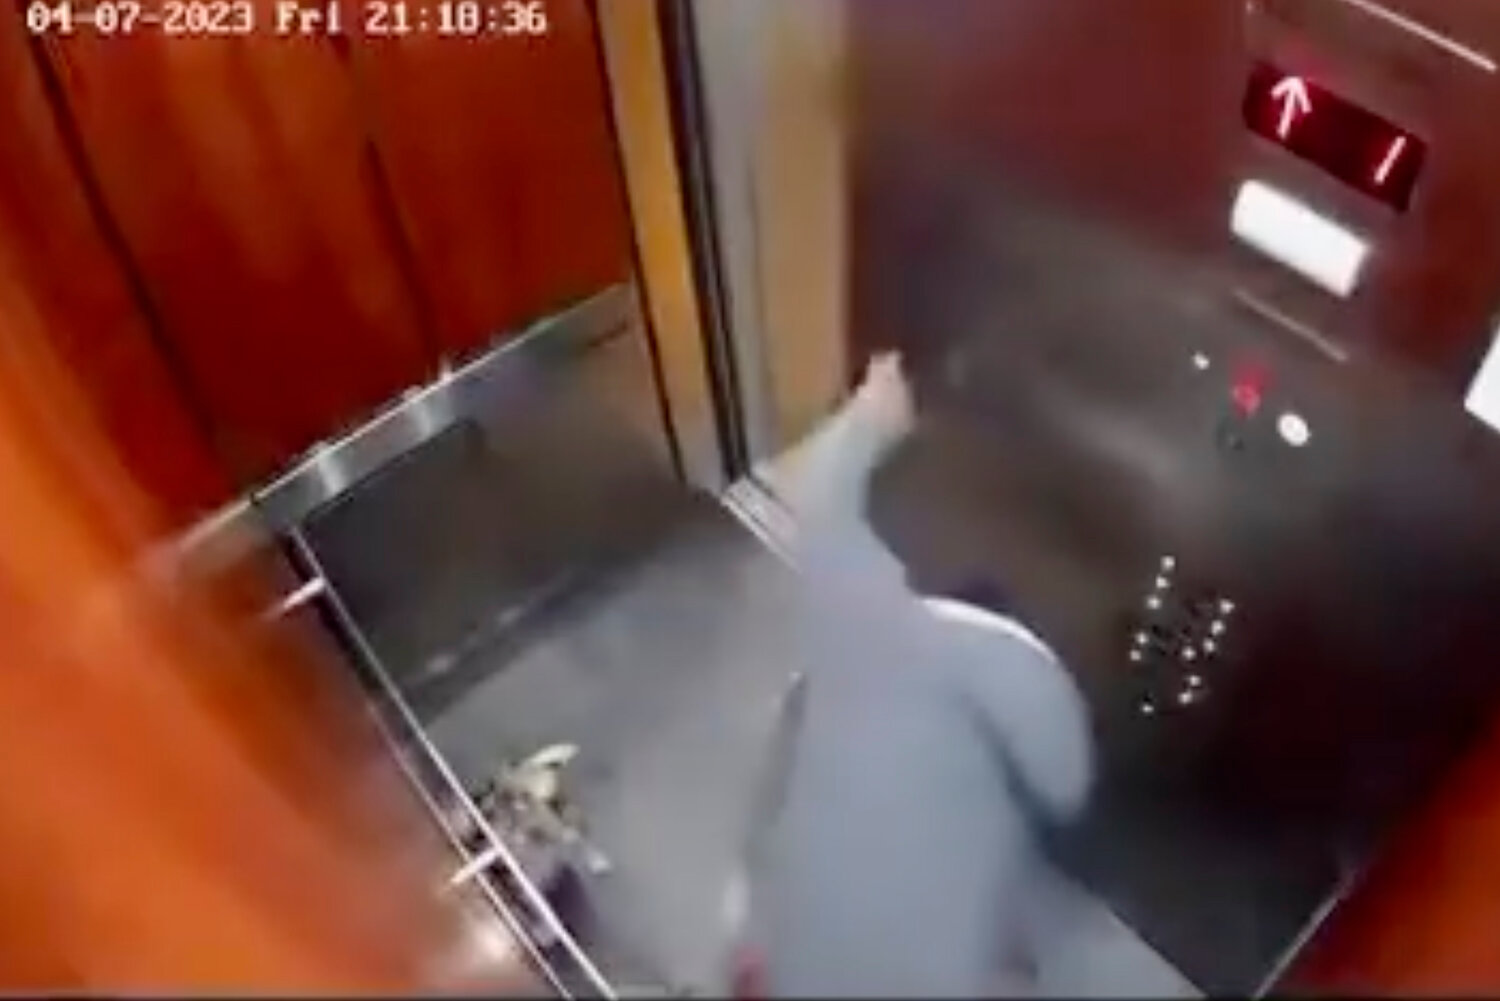 Trinton Hatton is shown beating one of his partner’s dogs in an elevator at Riverdale Gardens recently in a CCTV video.